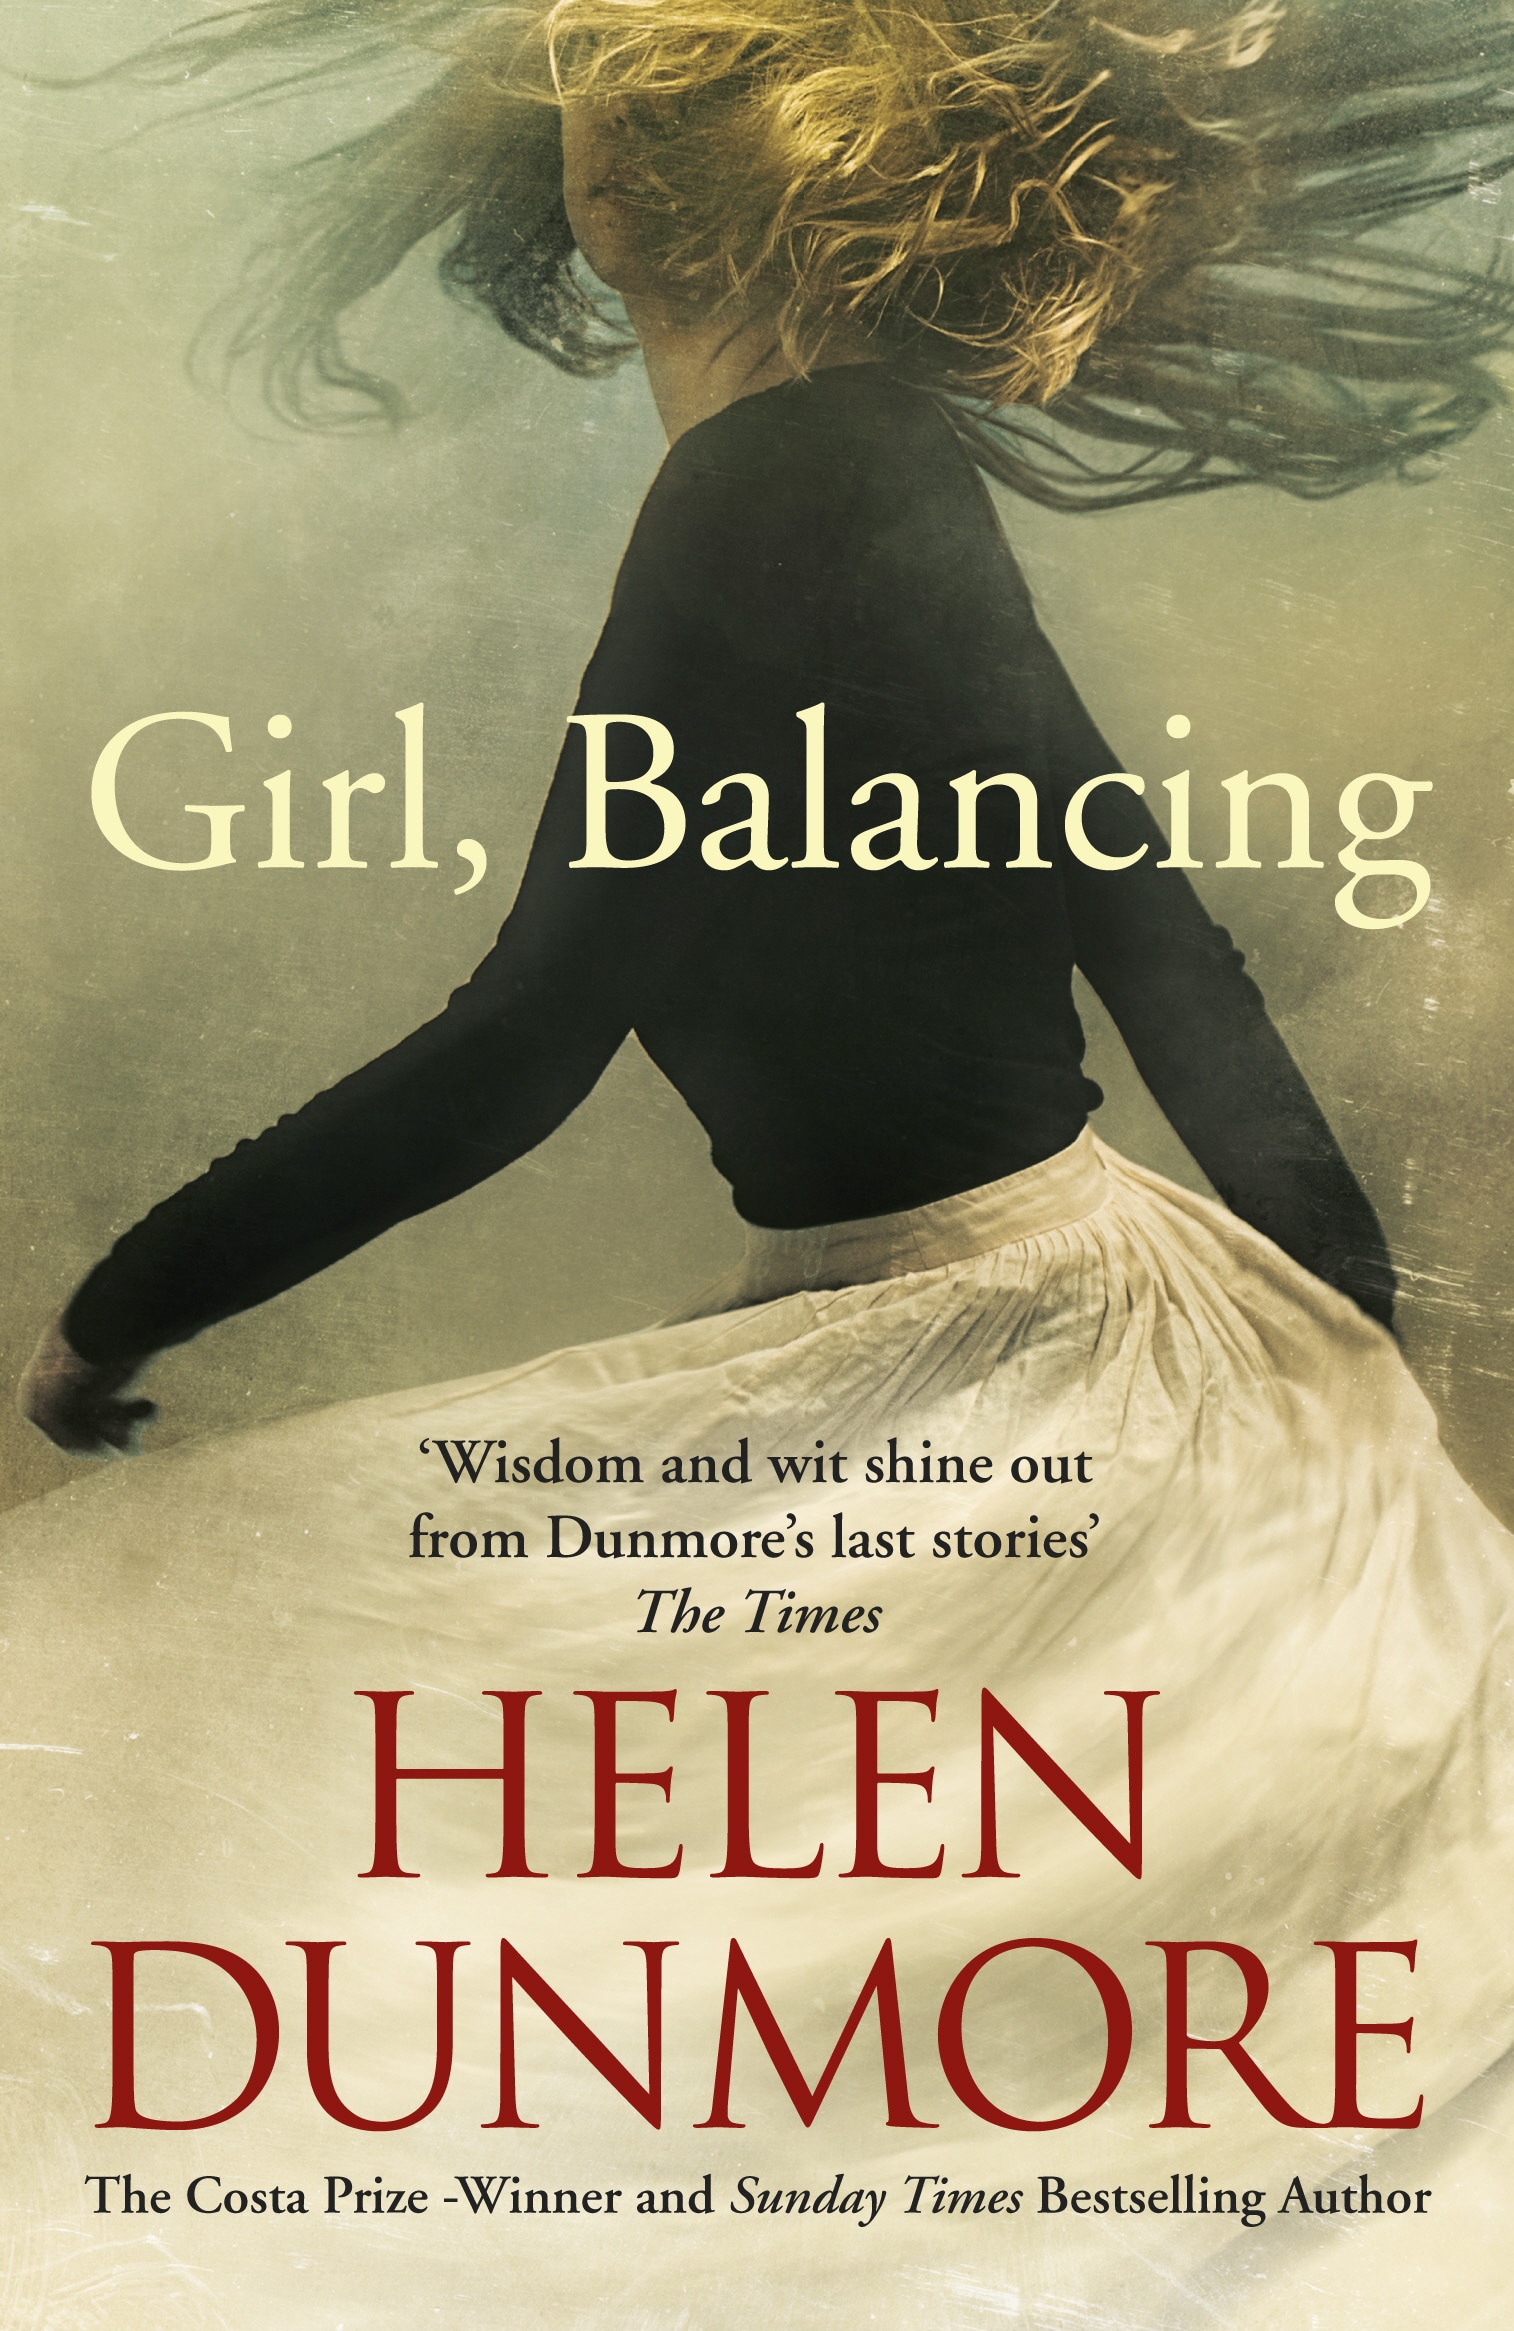 Book “Girl, Balancing & Other Stories” by Helen Dunmore — March 7, 2019